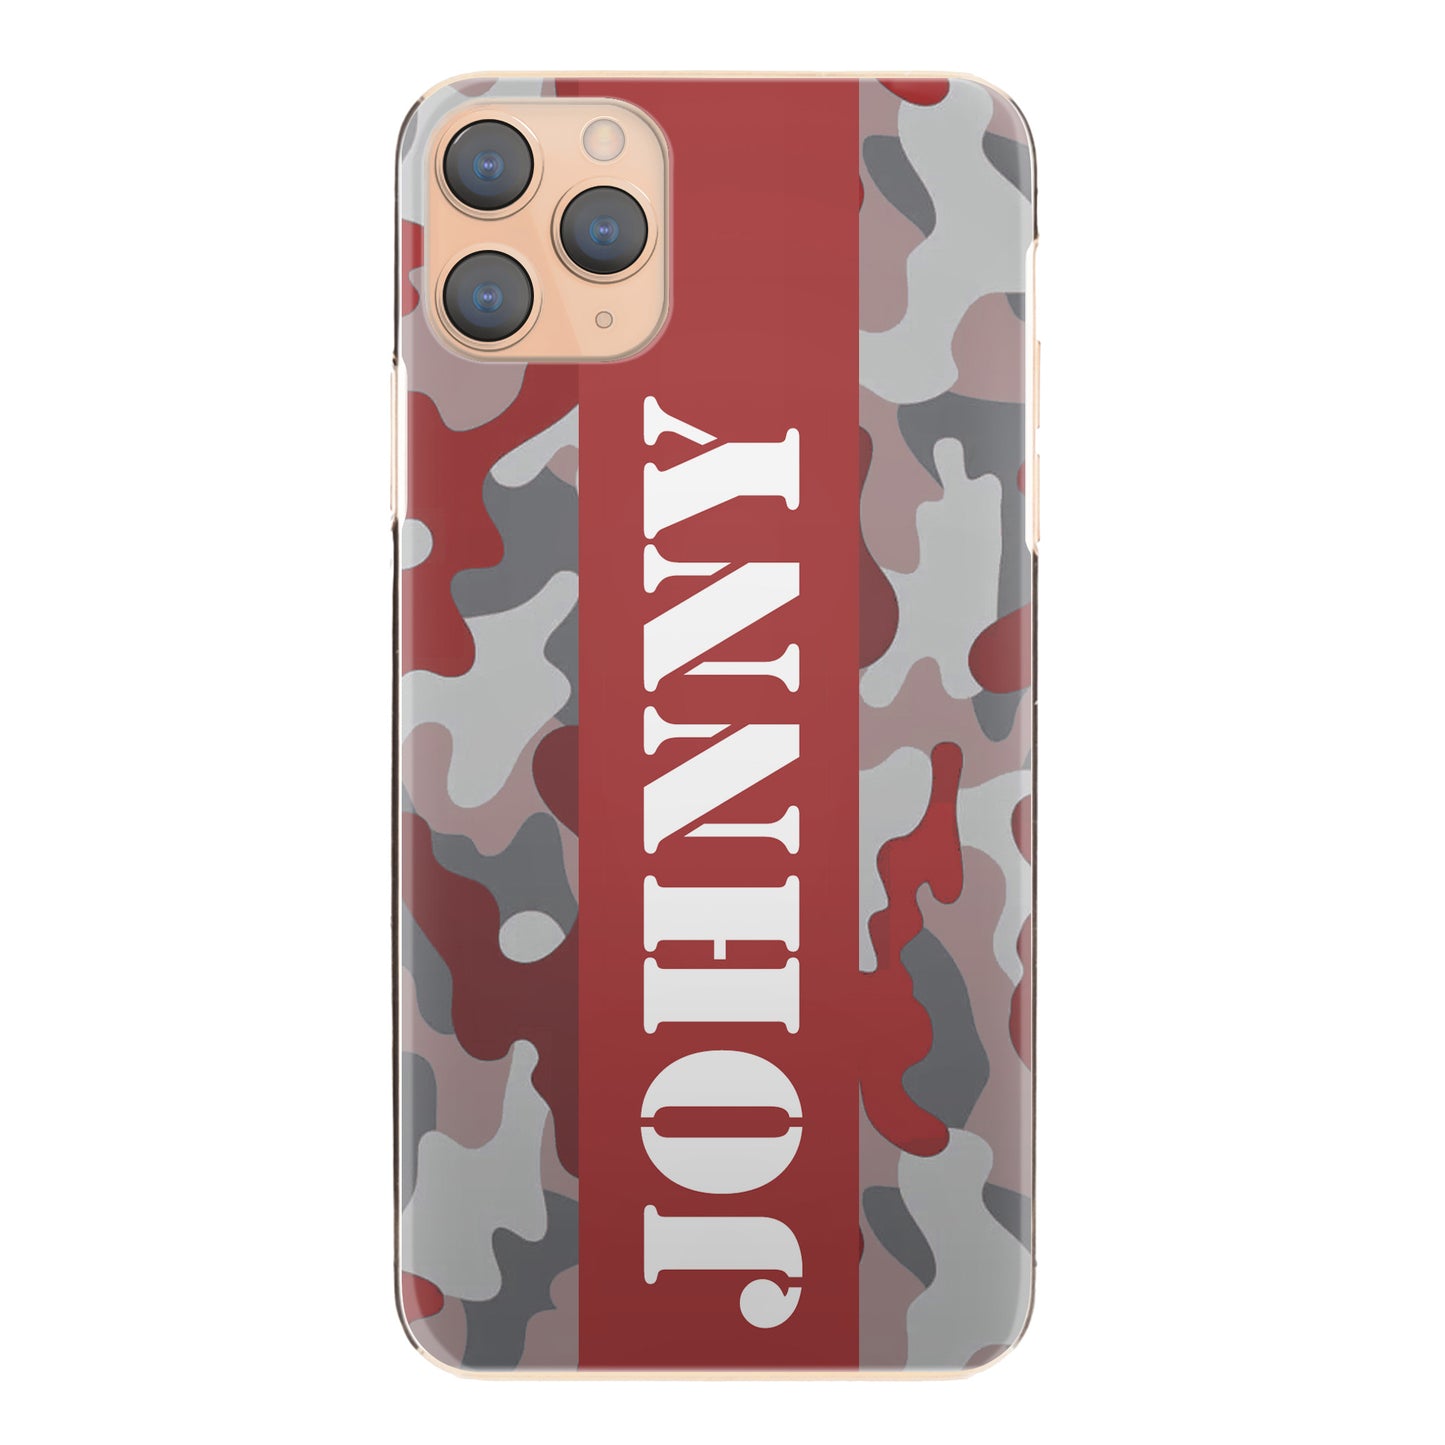 Personalised LG Phone Hard Case with Military Text on Red Camo